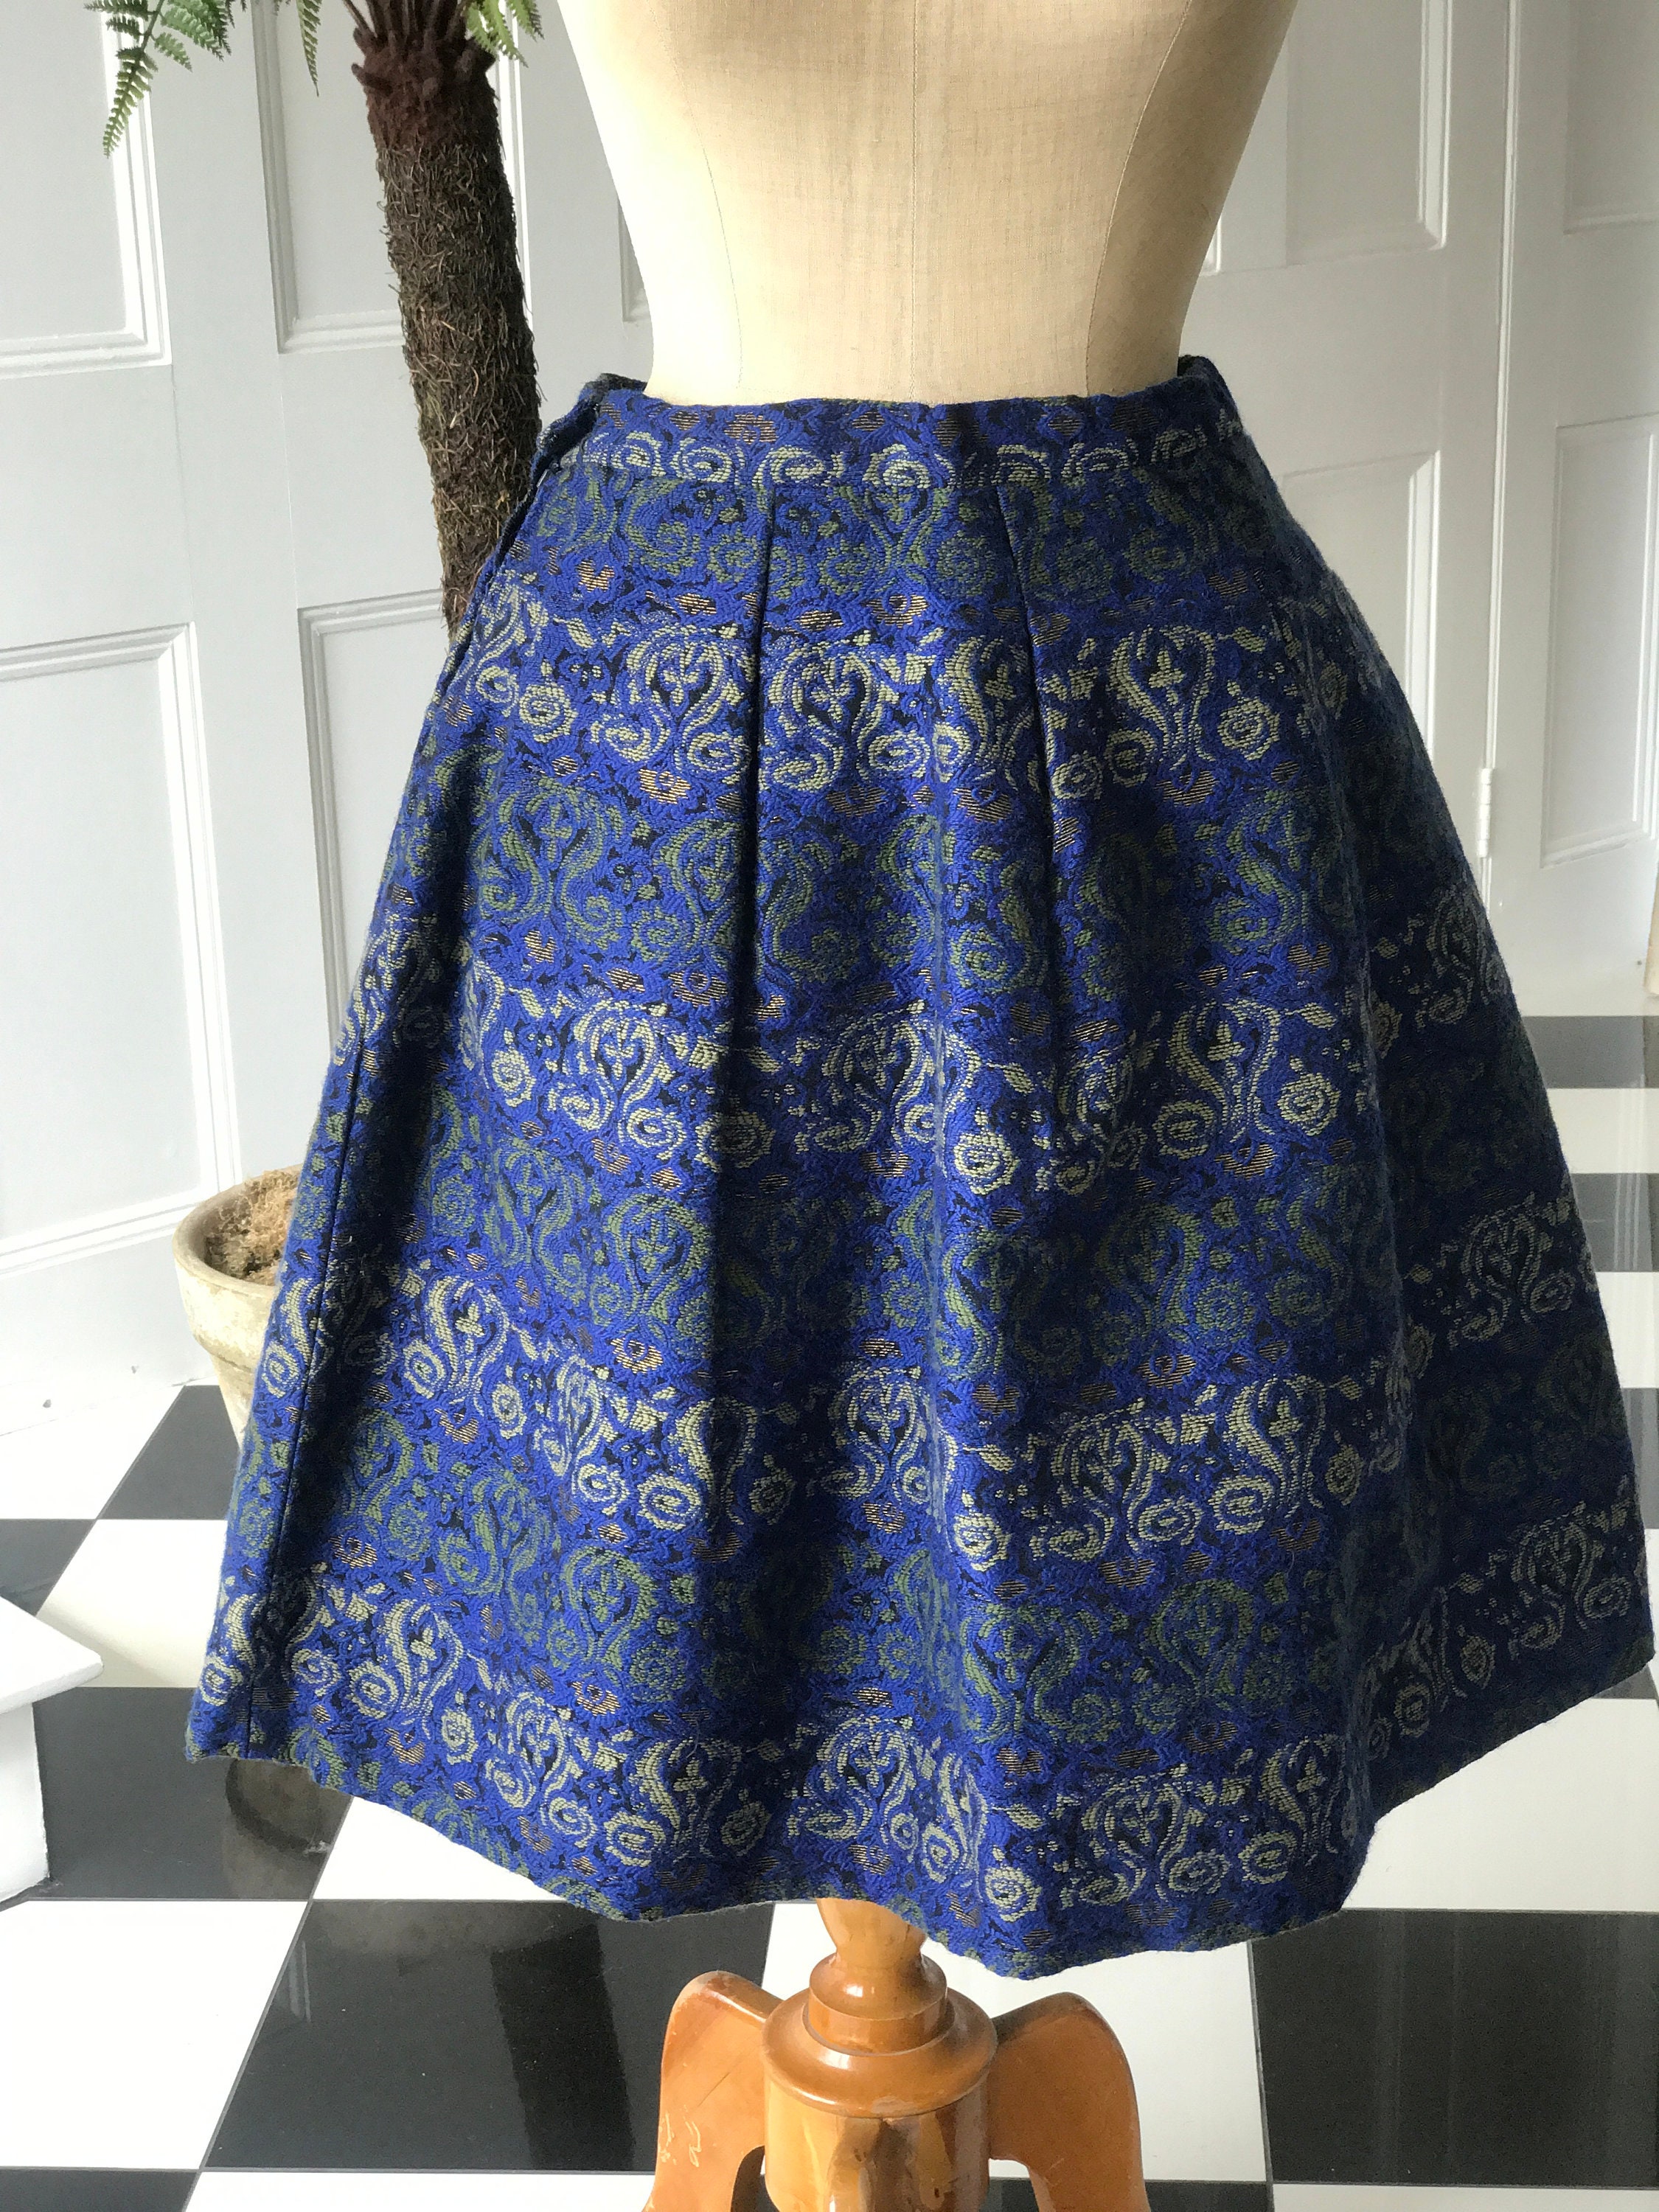 Vintage Wool Cabolt Blue and Gold Damask Thick Wool Skirt | Etsy UK